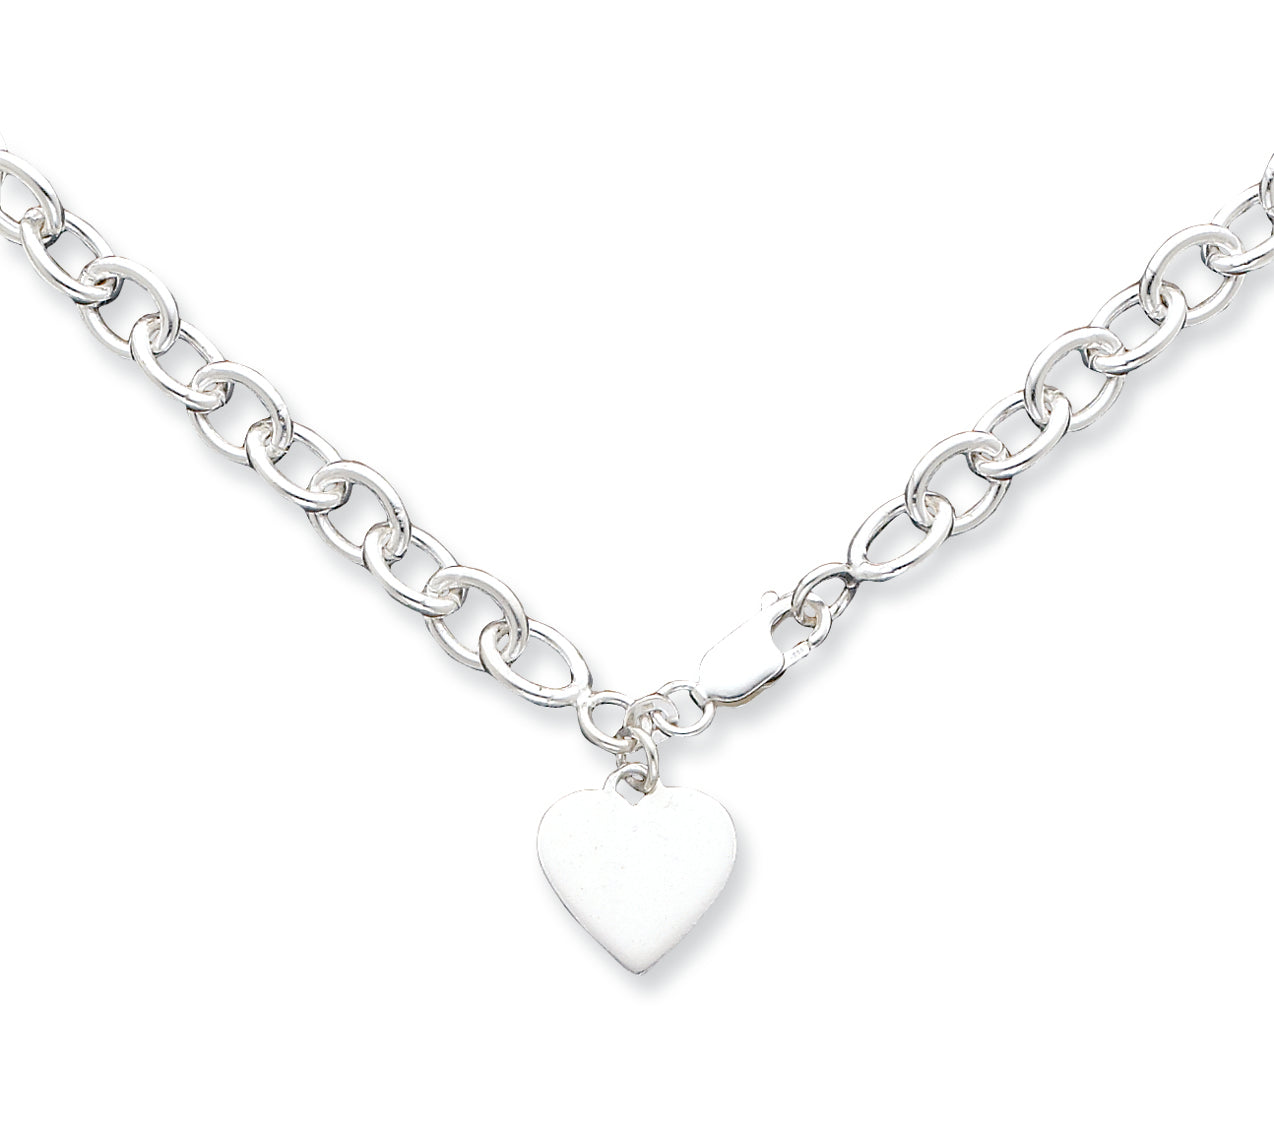 Sterling Silver w/ Heart Link Necklace 18 Inches